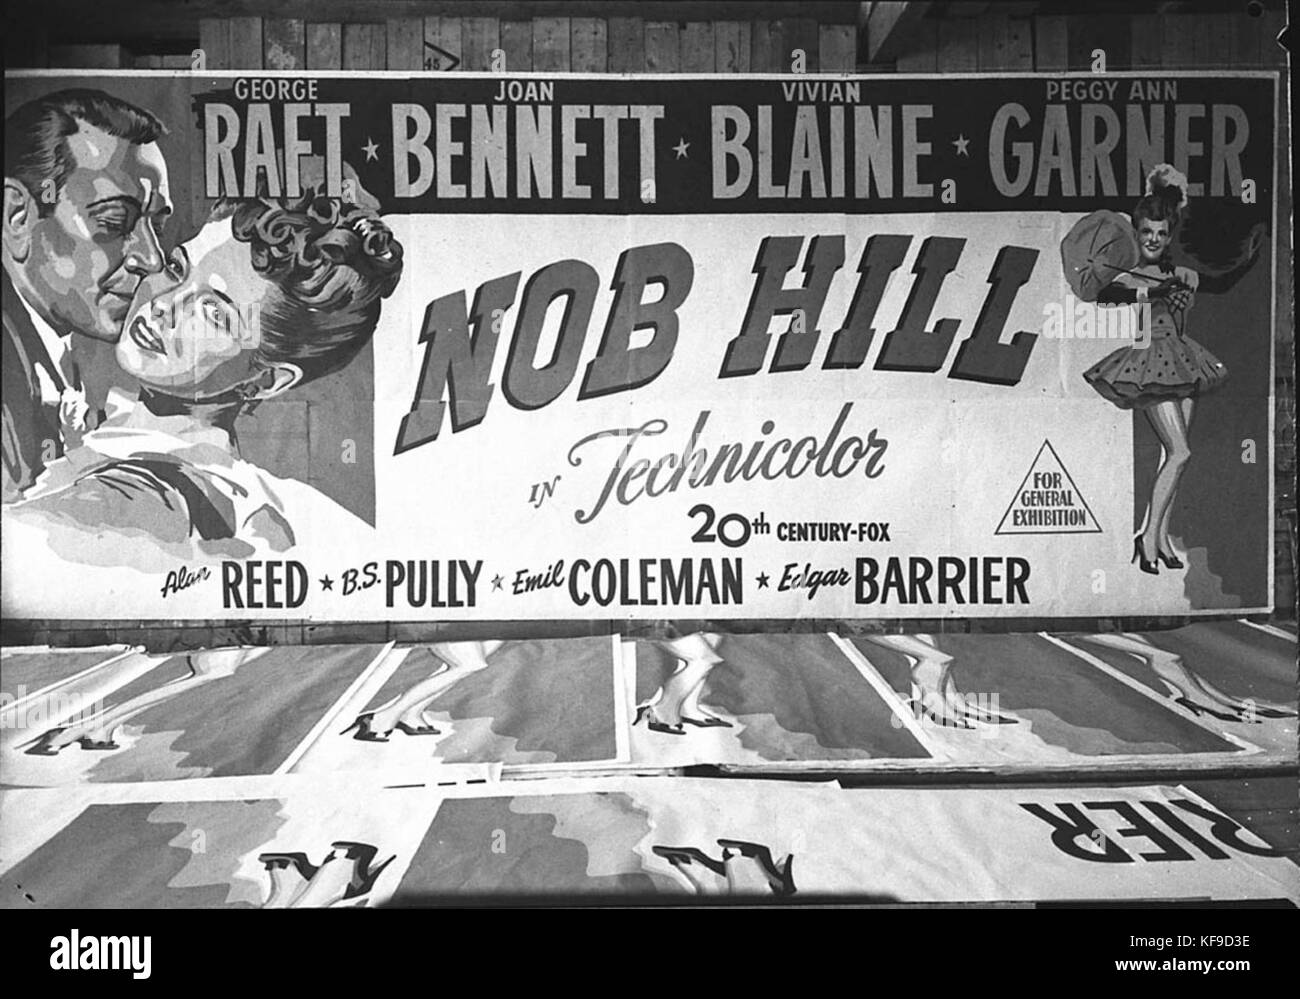 13495 Nob Hill poster with George Raft Joan Bennett Vivian Blaine Peggy Ann Garner Alan Reed BS Pully Emil Coleman and Edgar Barrier British Empire Films and Fox Films Stock Photo